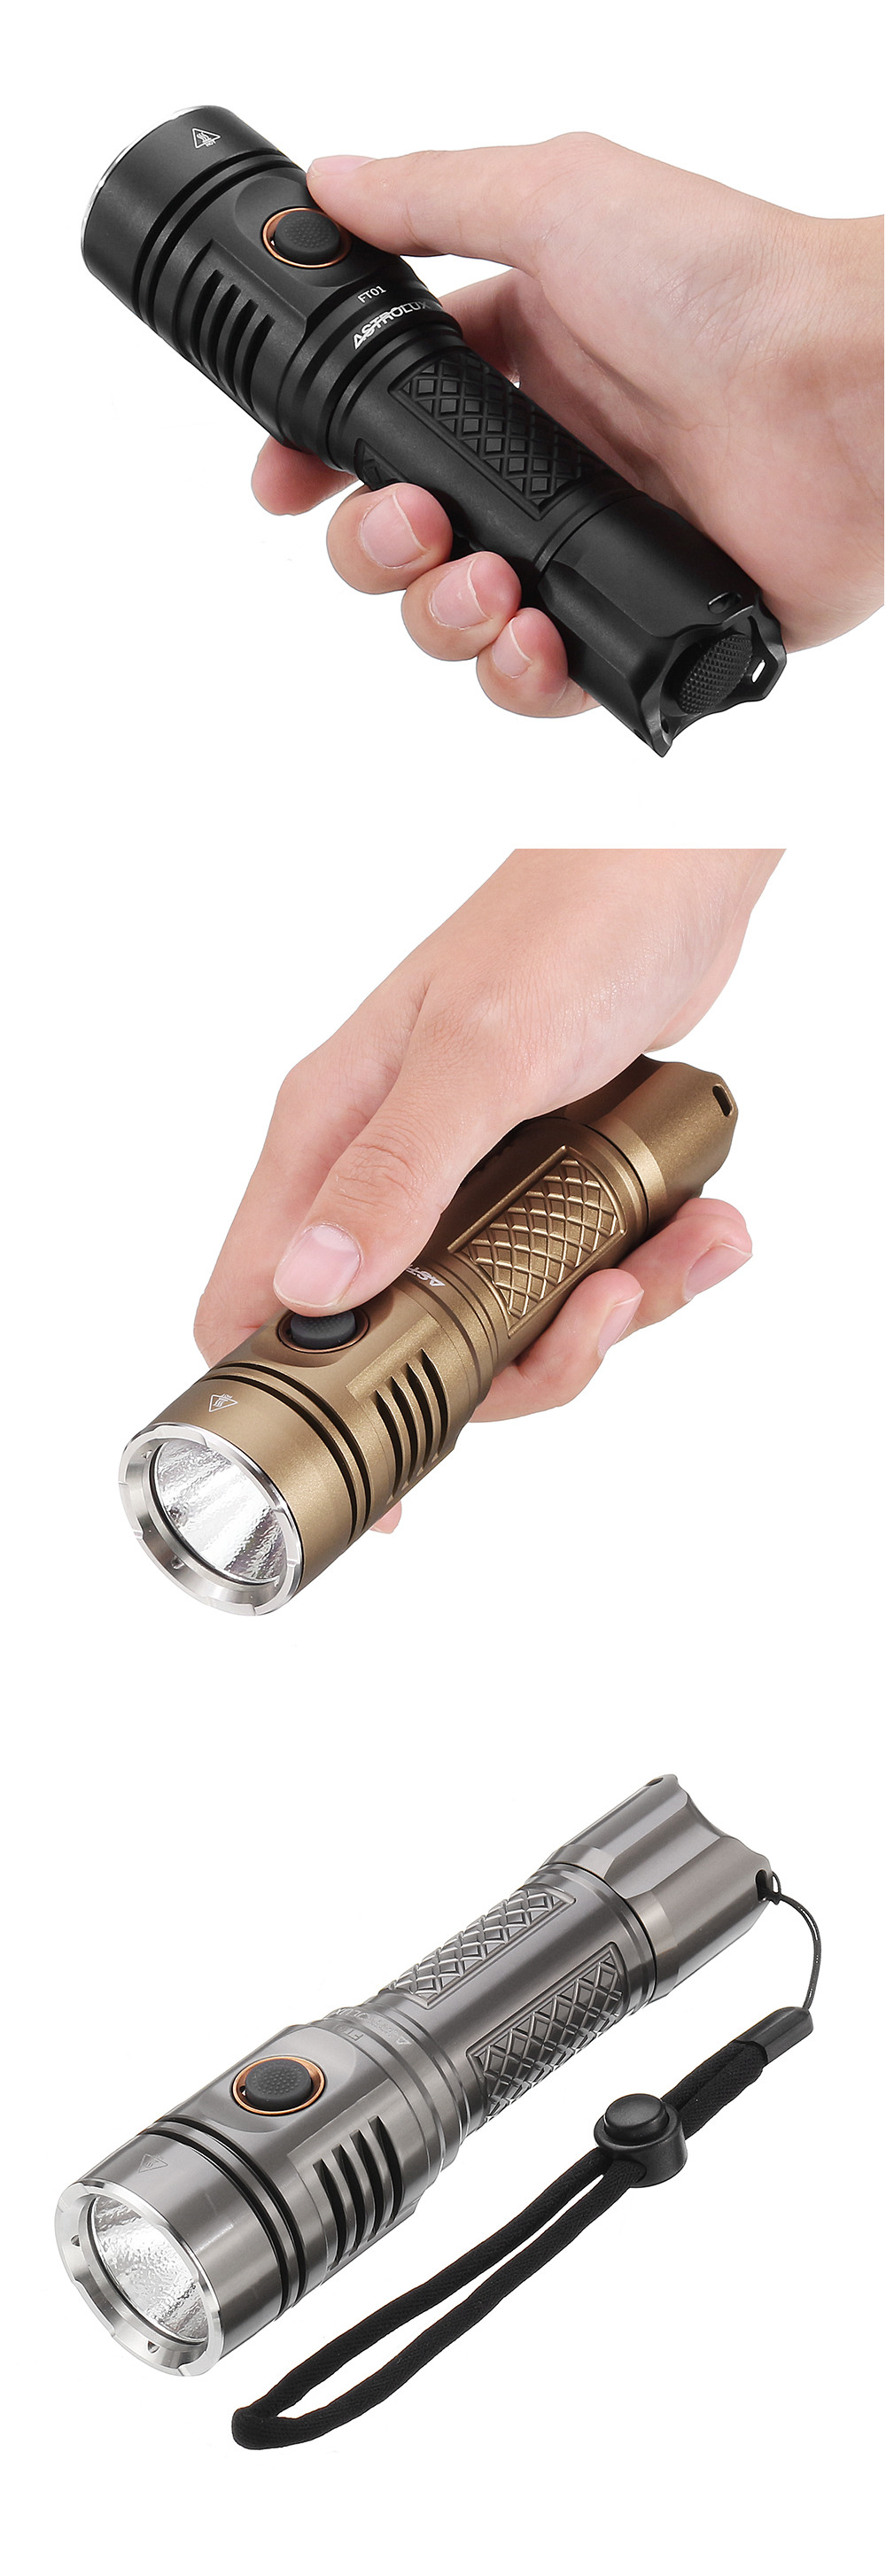 Astrolux-FT01-XHP502-2215LM-309m-8Modes-USB-Rechargeable-Military-Army-Tactical-21700-18650-LED-Flas-1353272